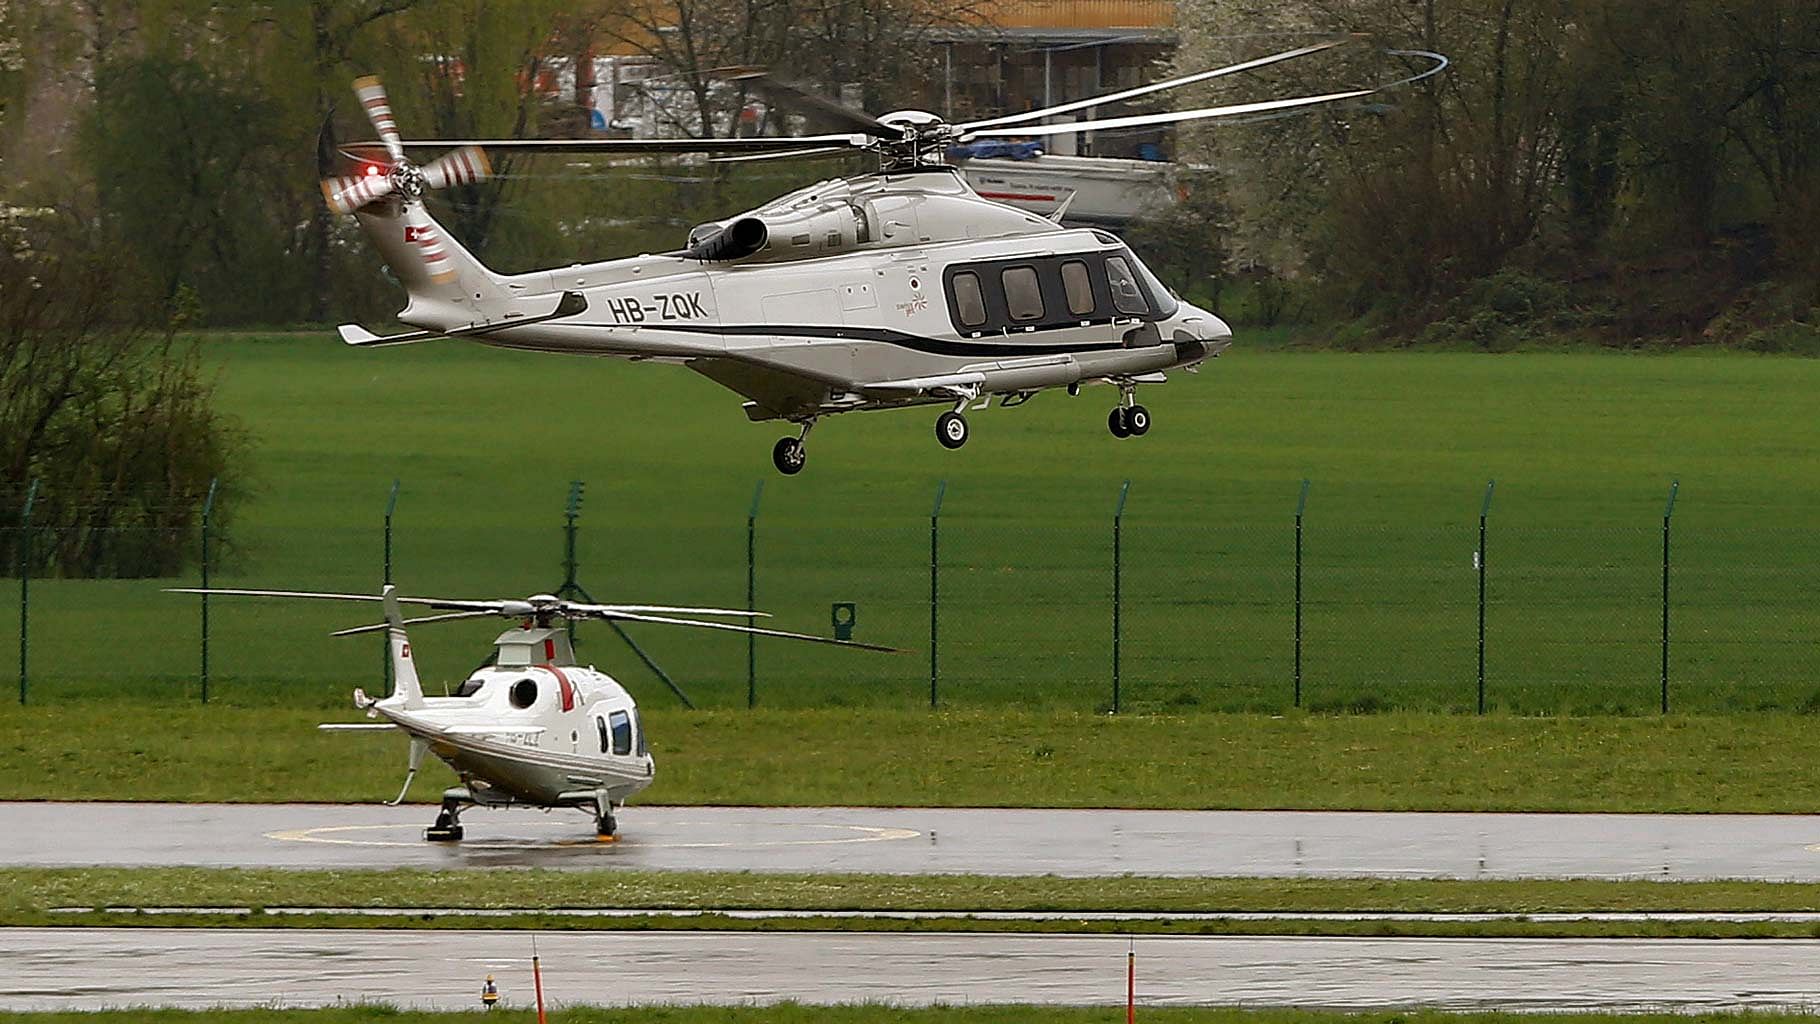 An Agusta-Westland AW139 helicopter. (Photo: Reuters)